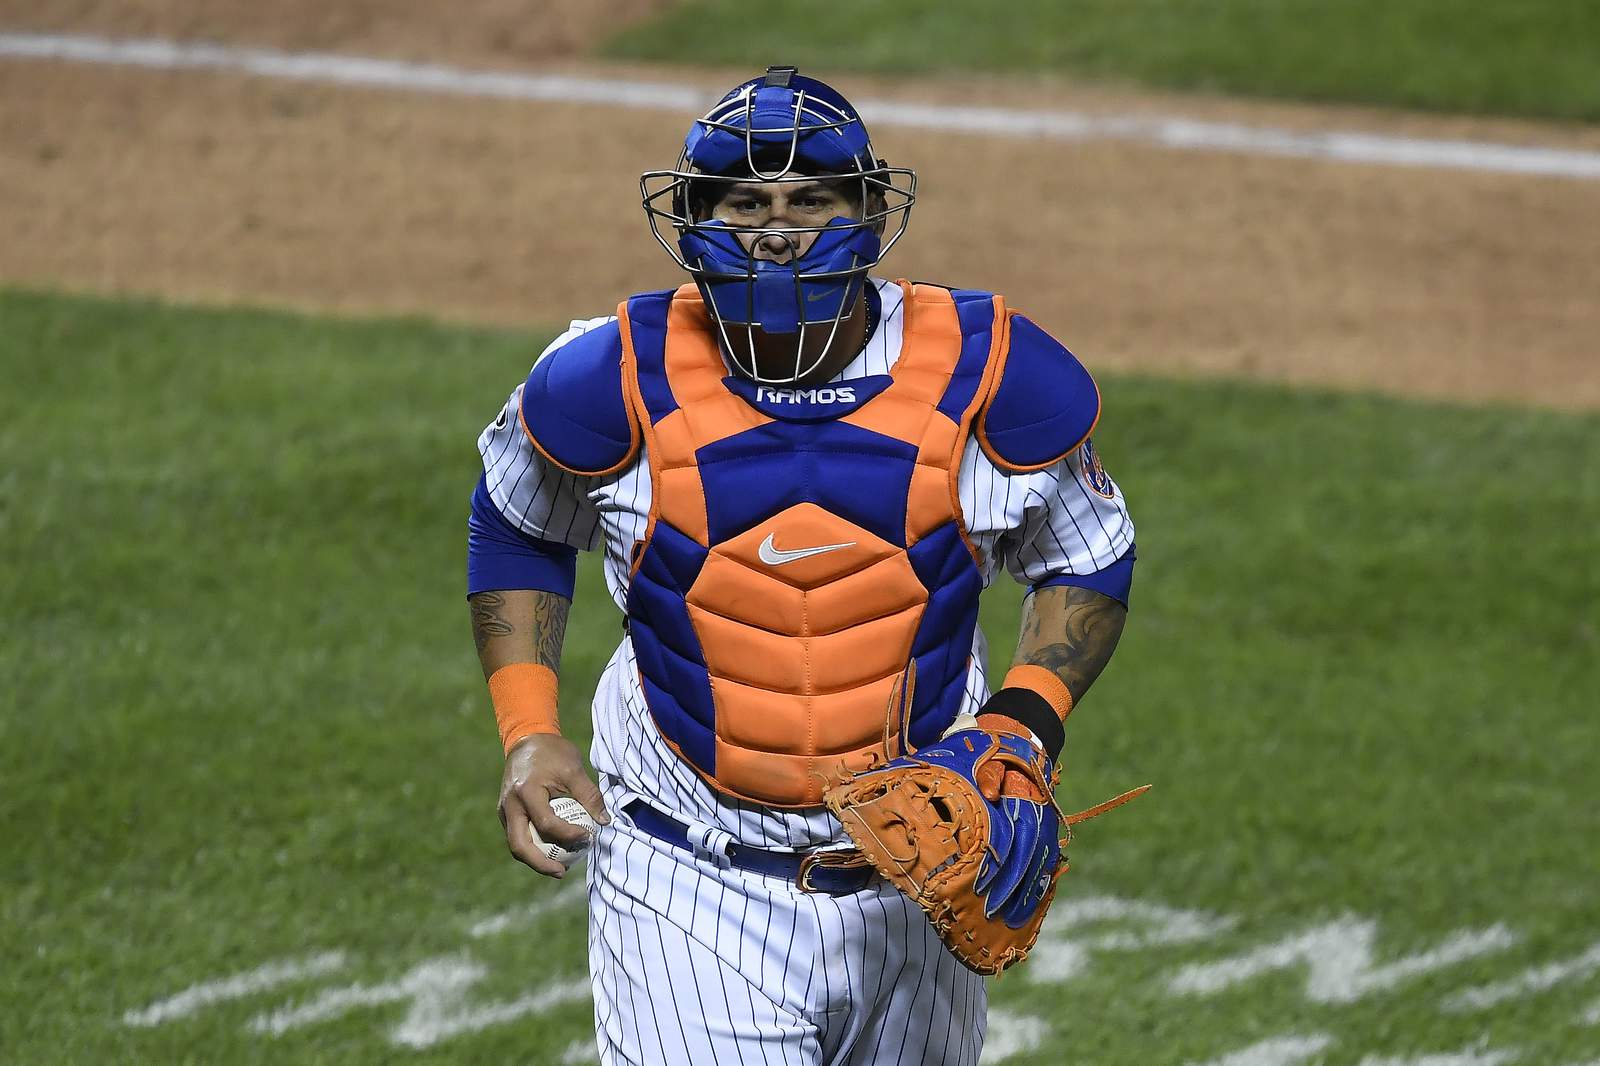 Detroit Tigers reportedly agree to 1-year deal with catcher Wilson Ramos